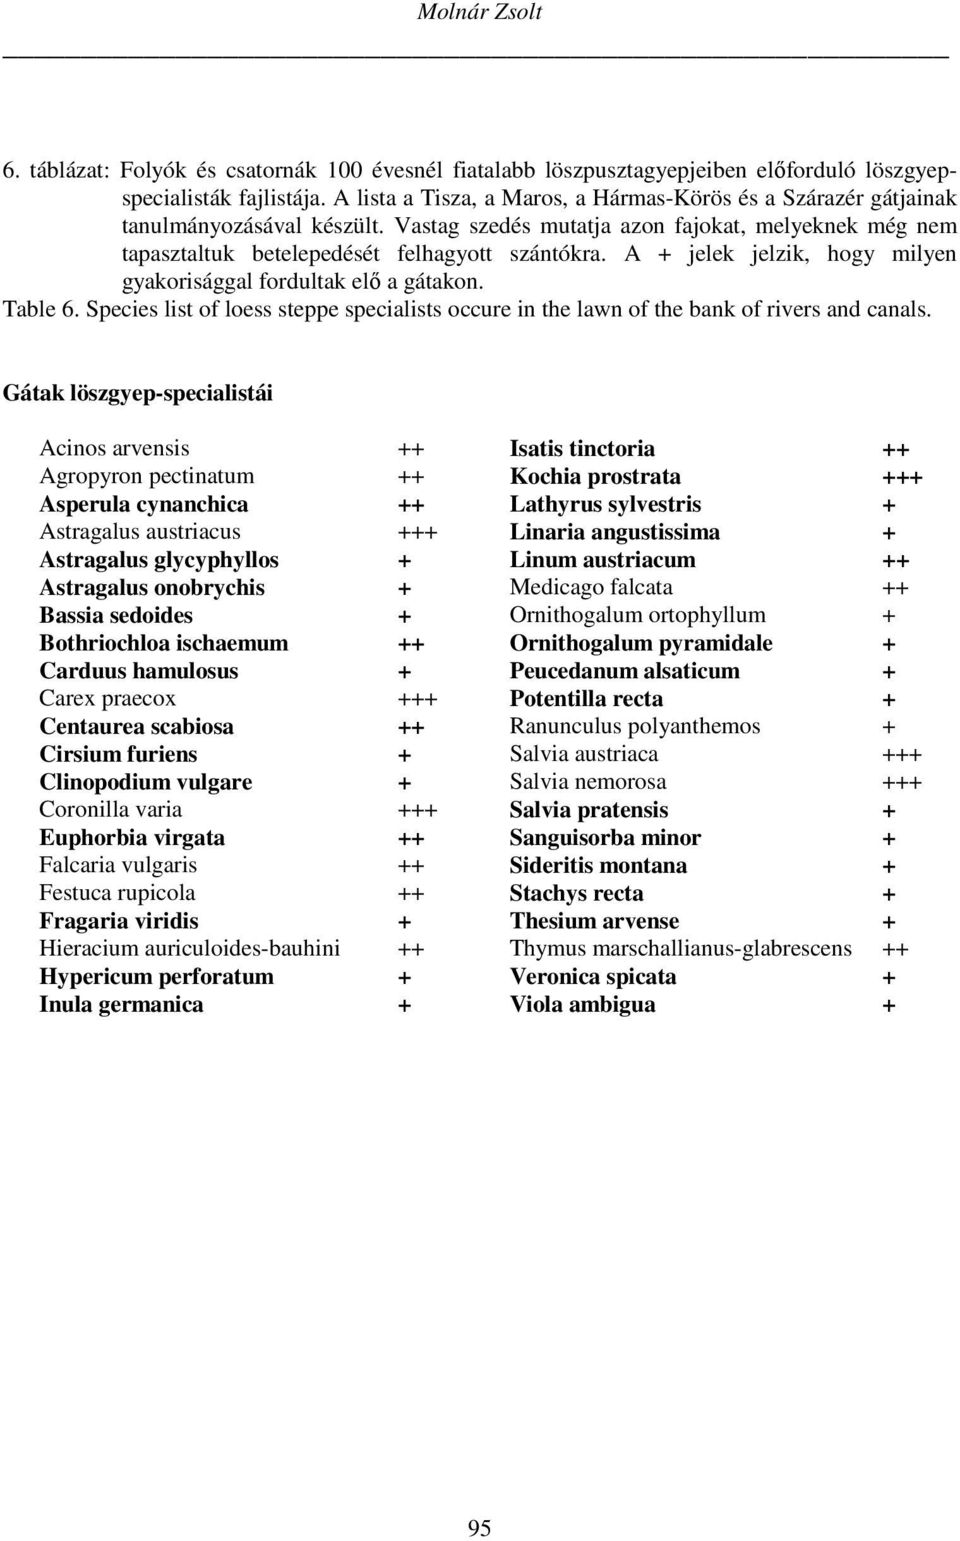 A + jelek jelzik, hogy milyen gyakorisággal fordultak elő a gátakon. Table 6. Species list of loess steppe specialists occure in the lawn of the bank of rivers and canals.